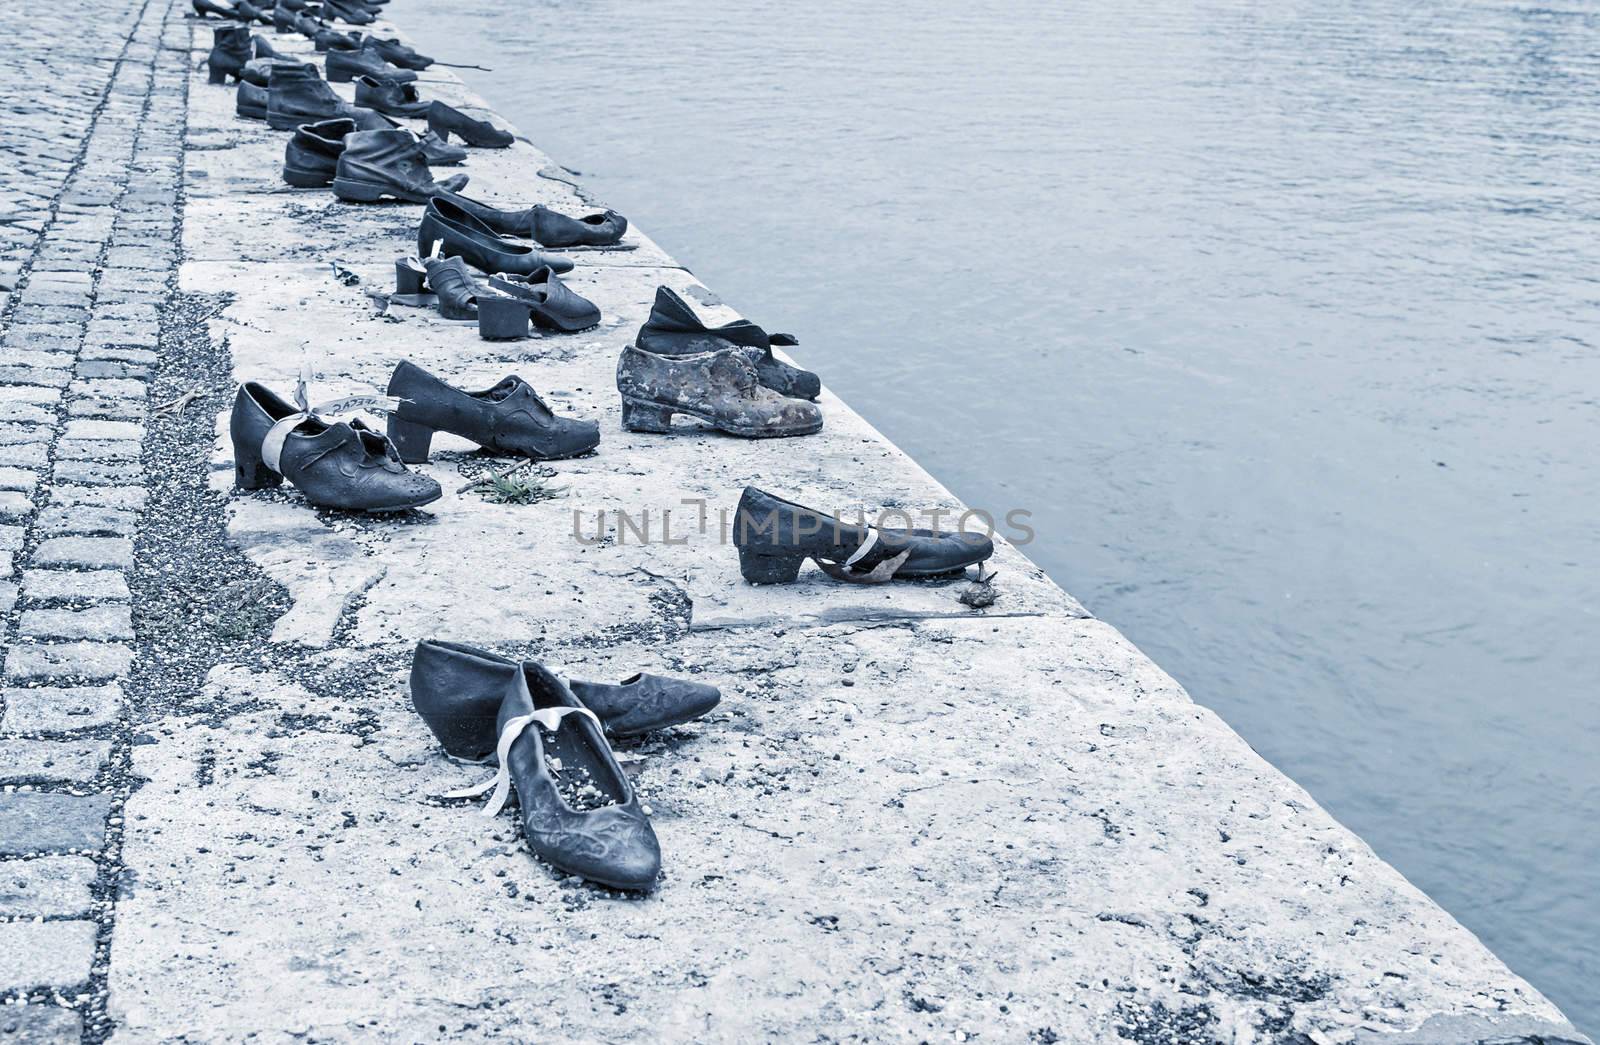 BUDAPEST, HUNGARY - October 12: Iron shoes memorial to Jewish people executed WW2 in Budapest Hungary on October 12, 2015 by Zhukow